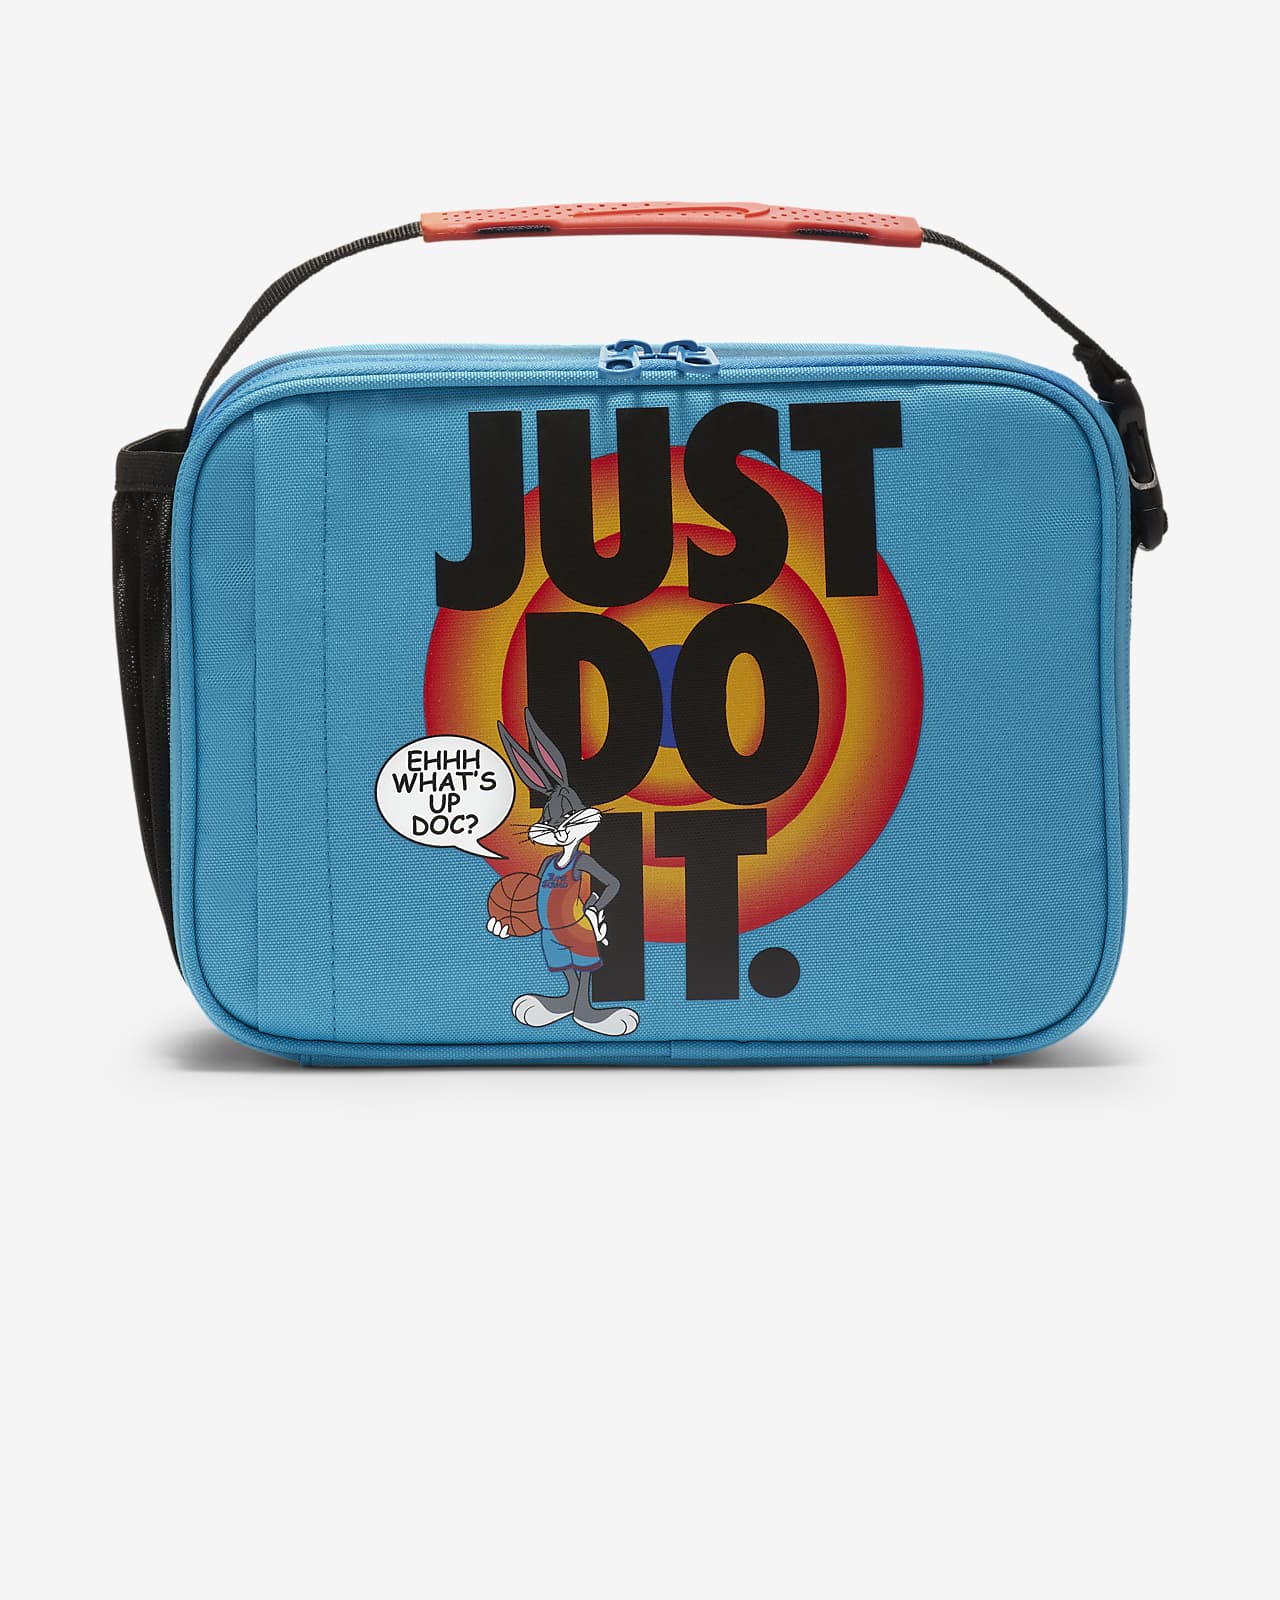 Nike JDI Insulated Lunch Bag - Blue - One Size